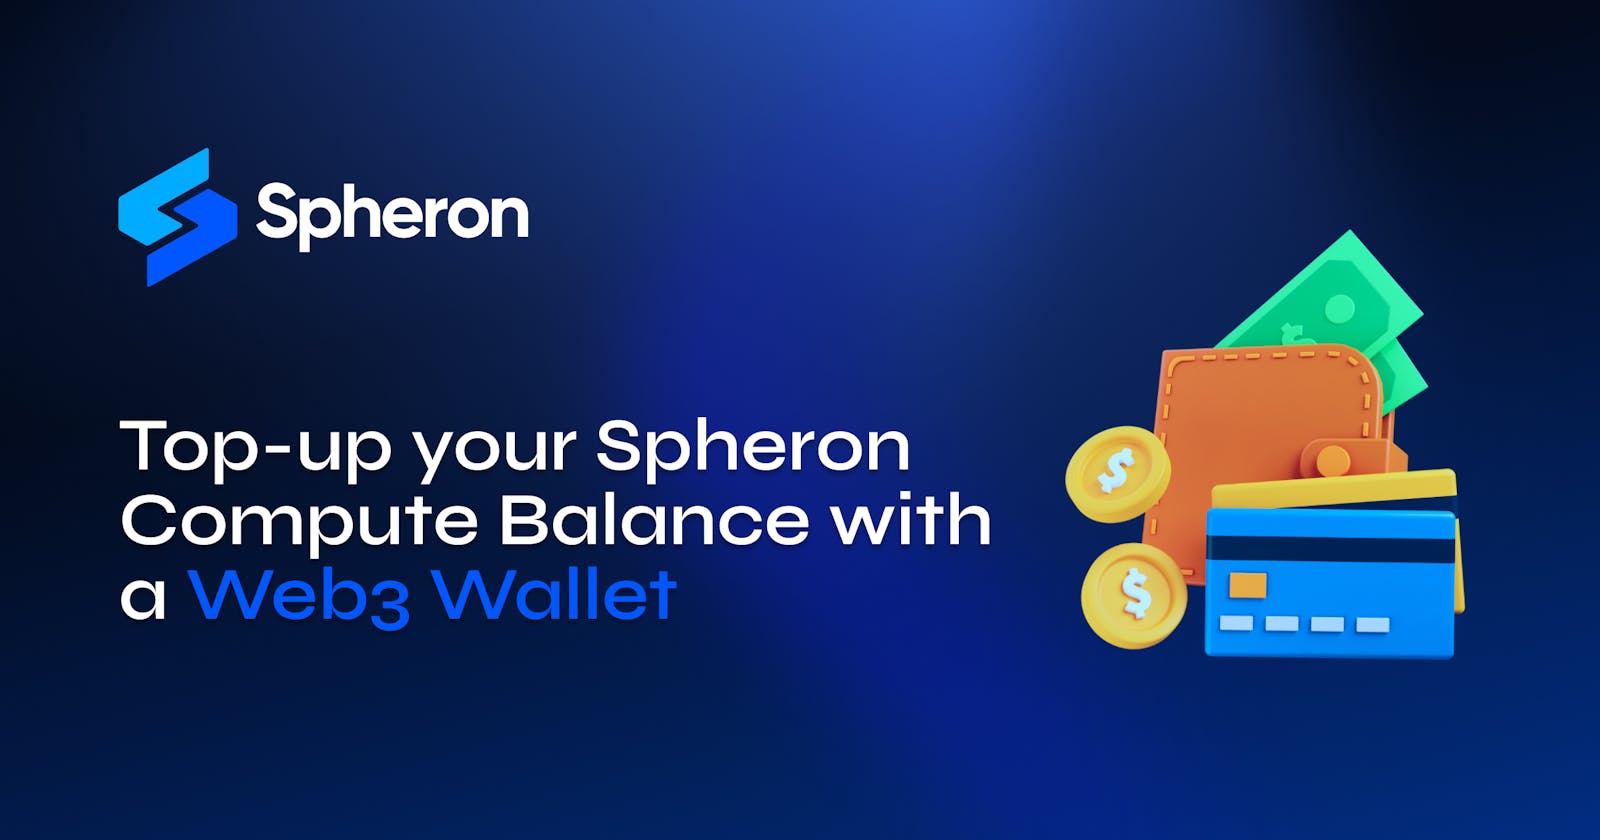 Top-up your Spheron Compute Balance with a Web3 Wallet